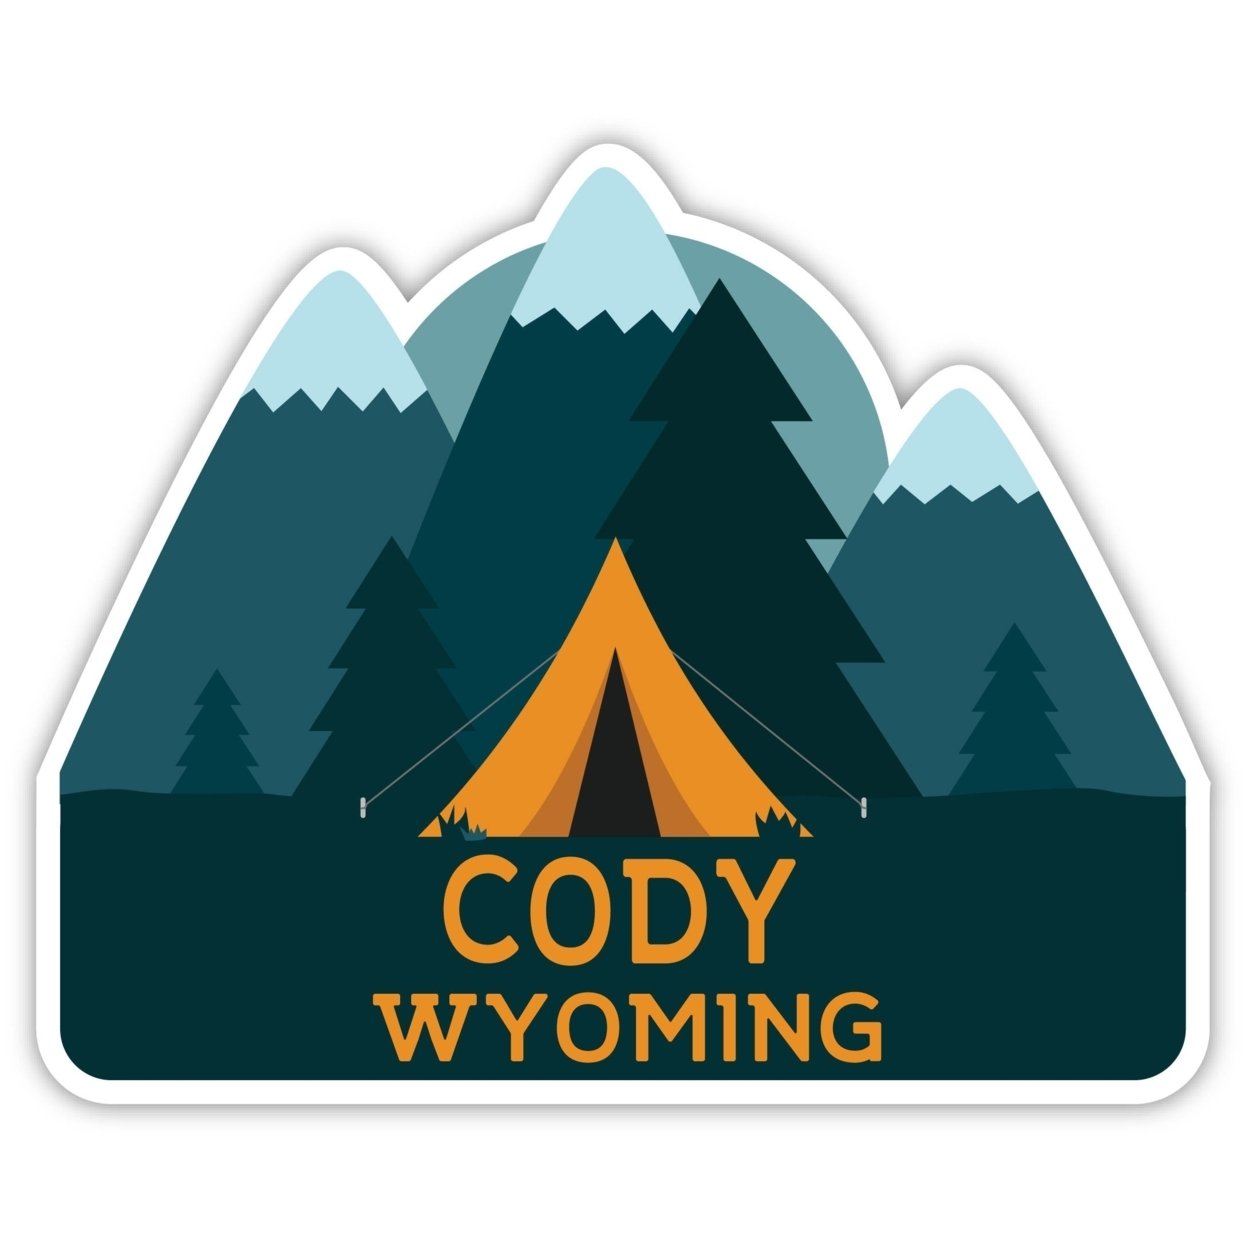 Cody Wyoming Souvenir Decorative Stickers (Choose Theme And Size) - 4-Pack, 8-Inch, Adventures Awaits